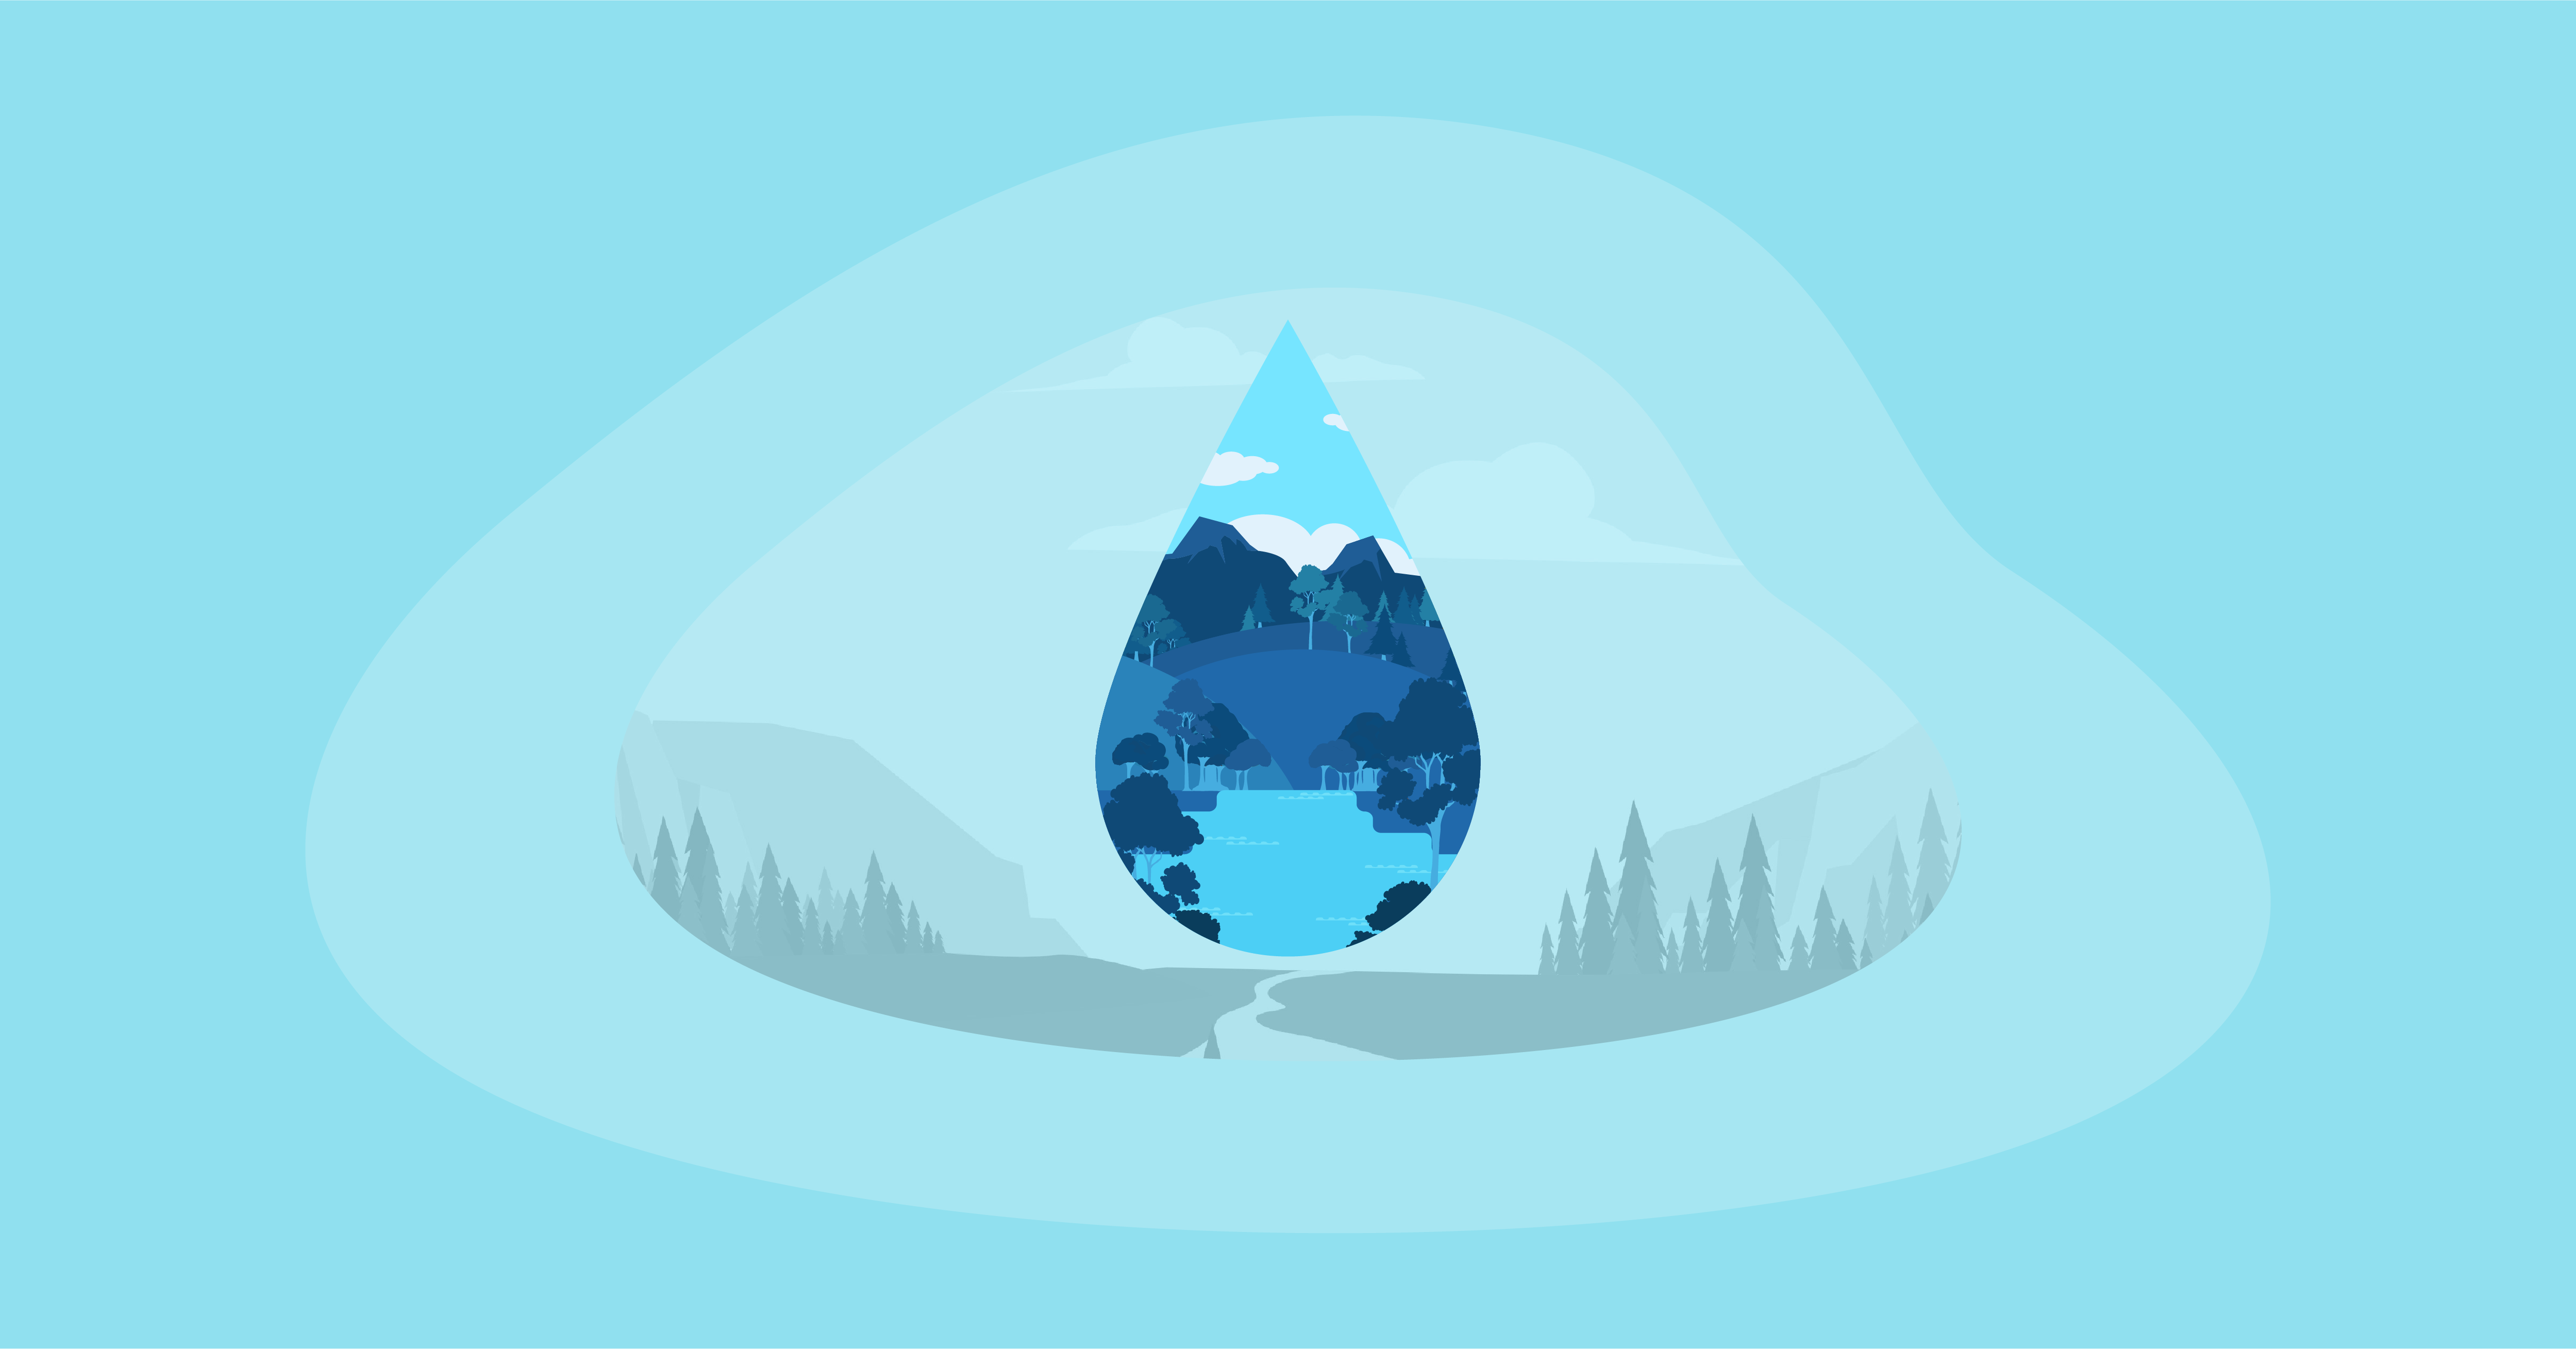 Illustration of a big water drop containing another illustration of nature